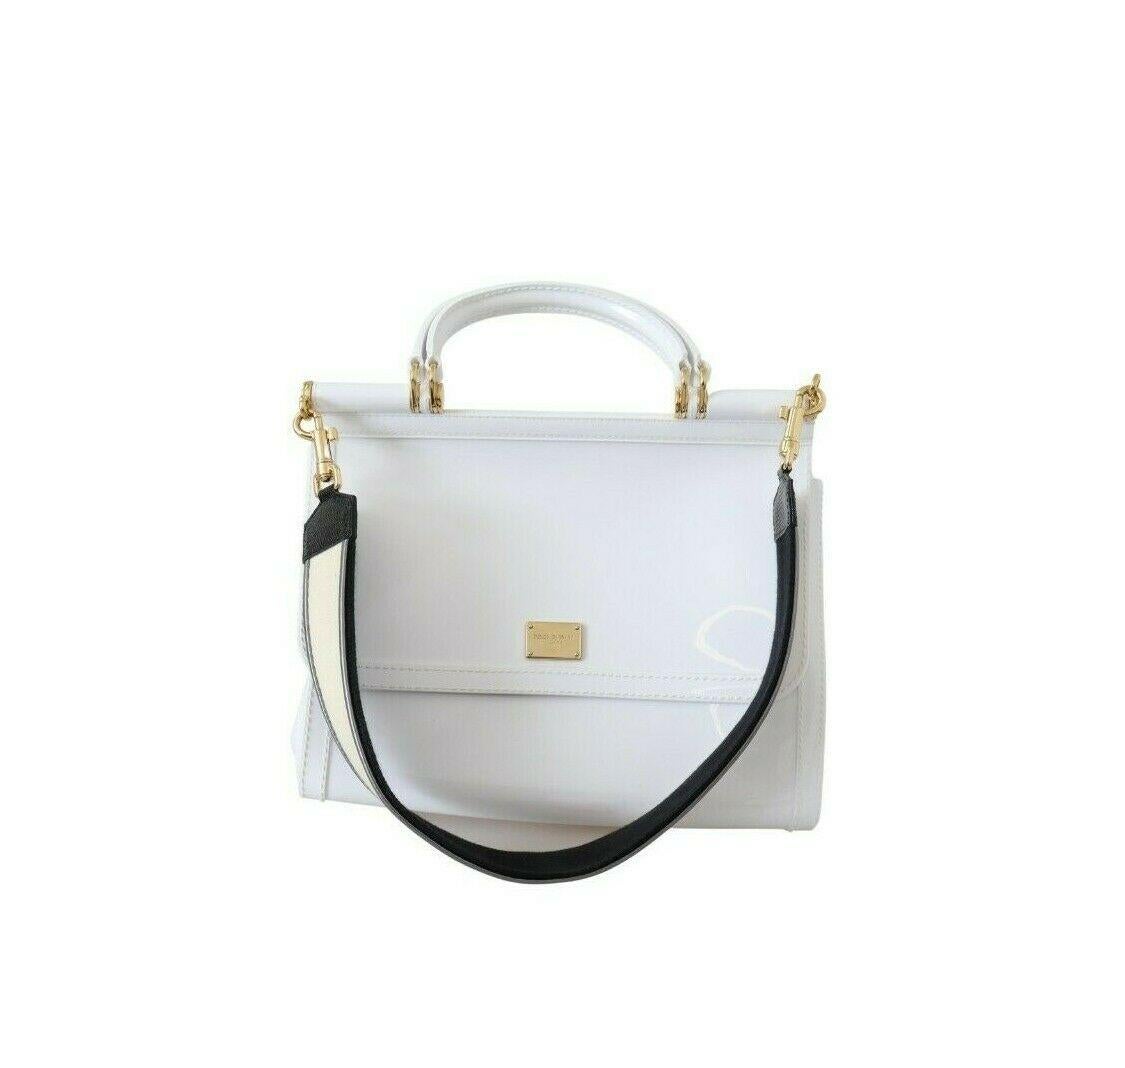 Absolutely stunning, 100% Authentic, brand new with tags Dolce & Gabbana SICILY PVC shoulder bag with logo plaque and gold metal detailing featuring a detachable strap, handle strap and magnetic flap closure.

Model: Sicily Bag

Color: White with